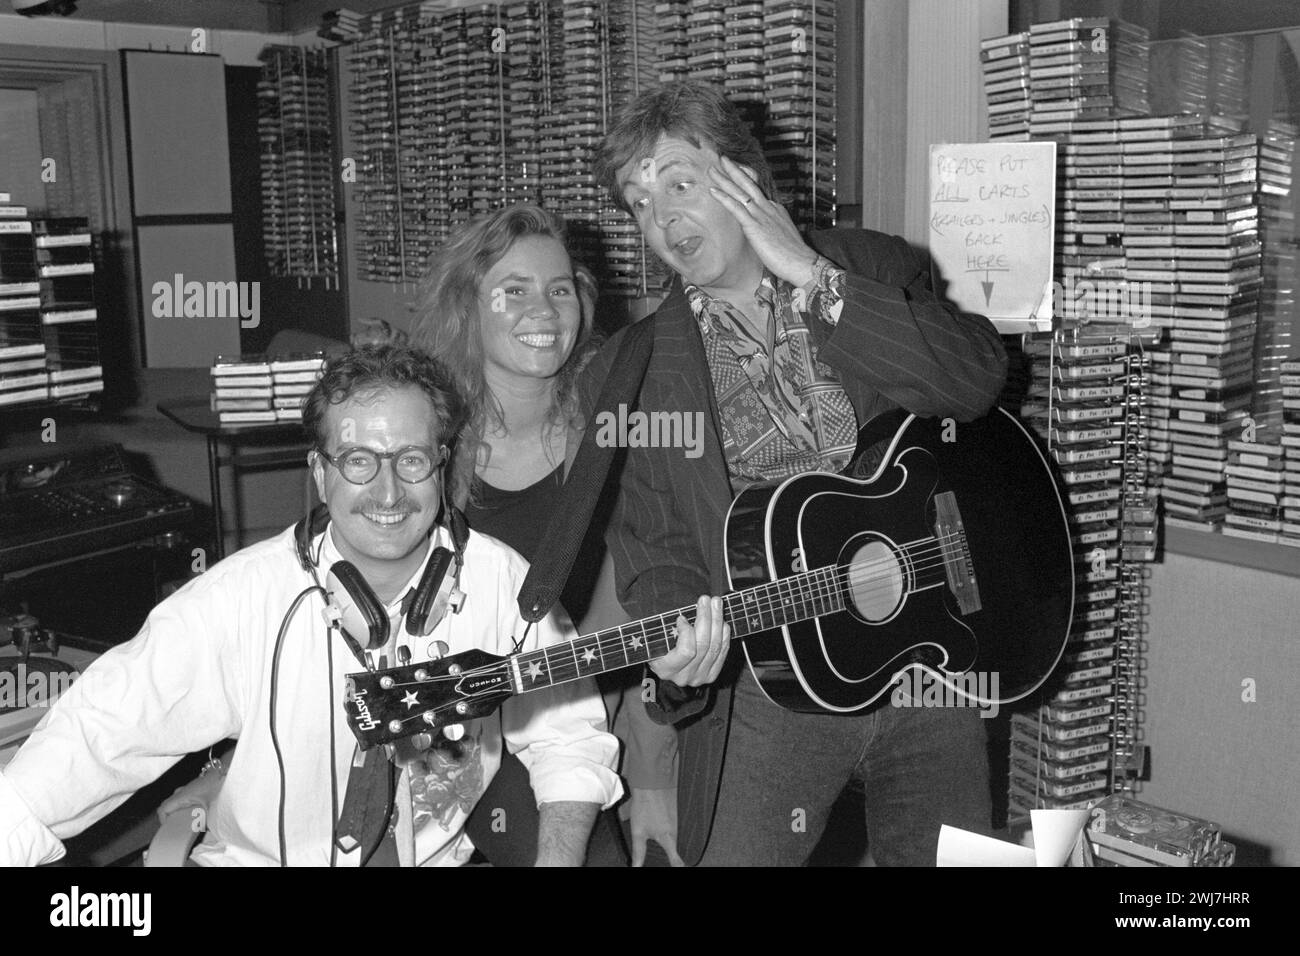 File photo dated 13/06/90 of Paul McCartney surprising Radio 1 DJ Steve Wright (left) and his production assistant Dianne Oxberry. Mr Wright has died at the age of 69, according to BBC News. A statement shared to BBC News by Wright's family said: 'It is with deep sorrow and profound regret that we announce the passing of our beloved Steve Wright.' Stock Photo